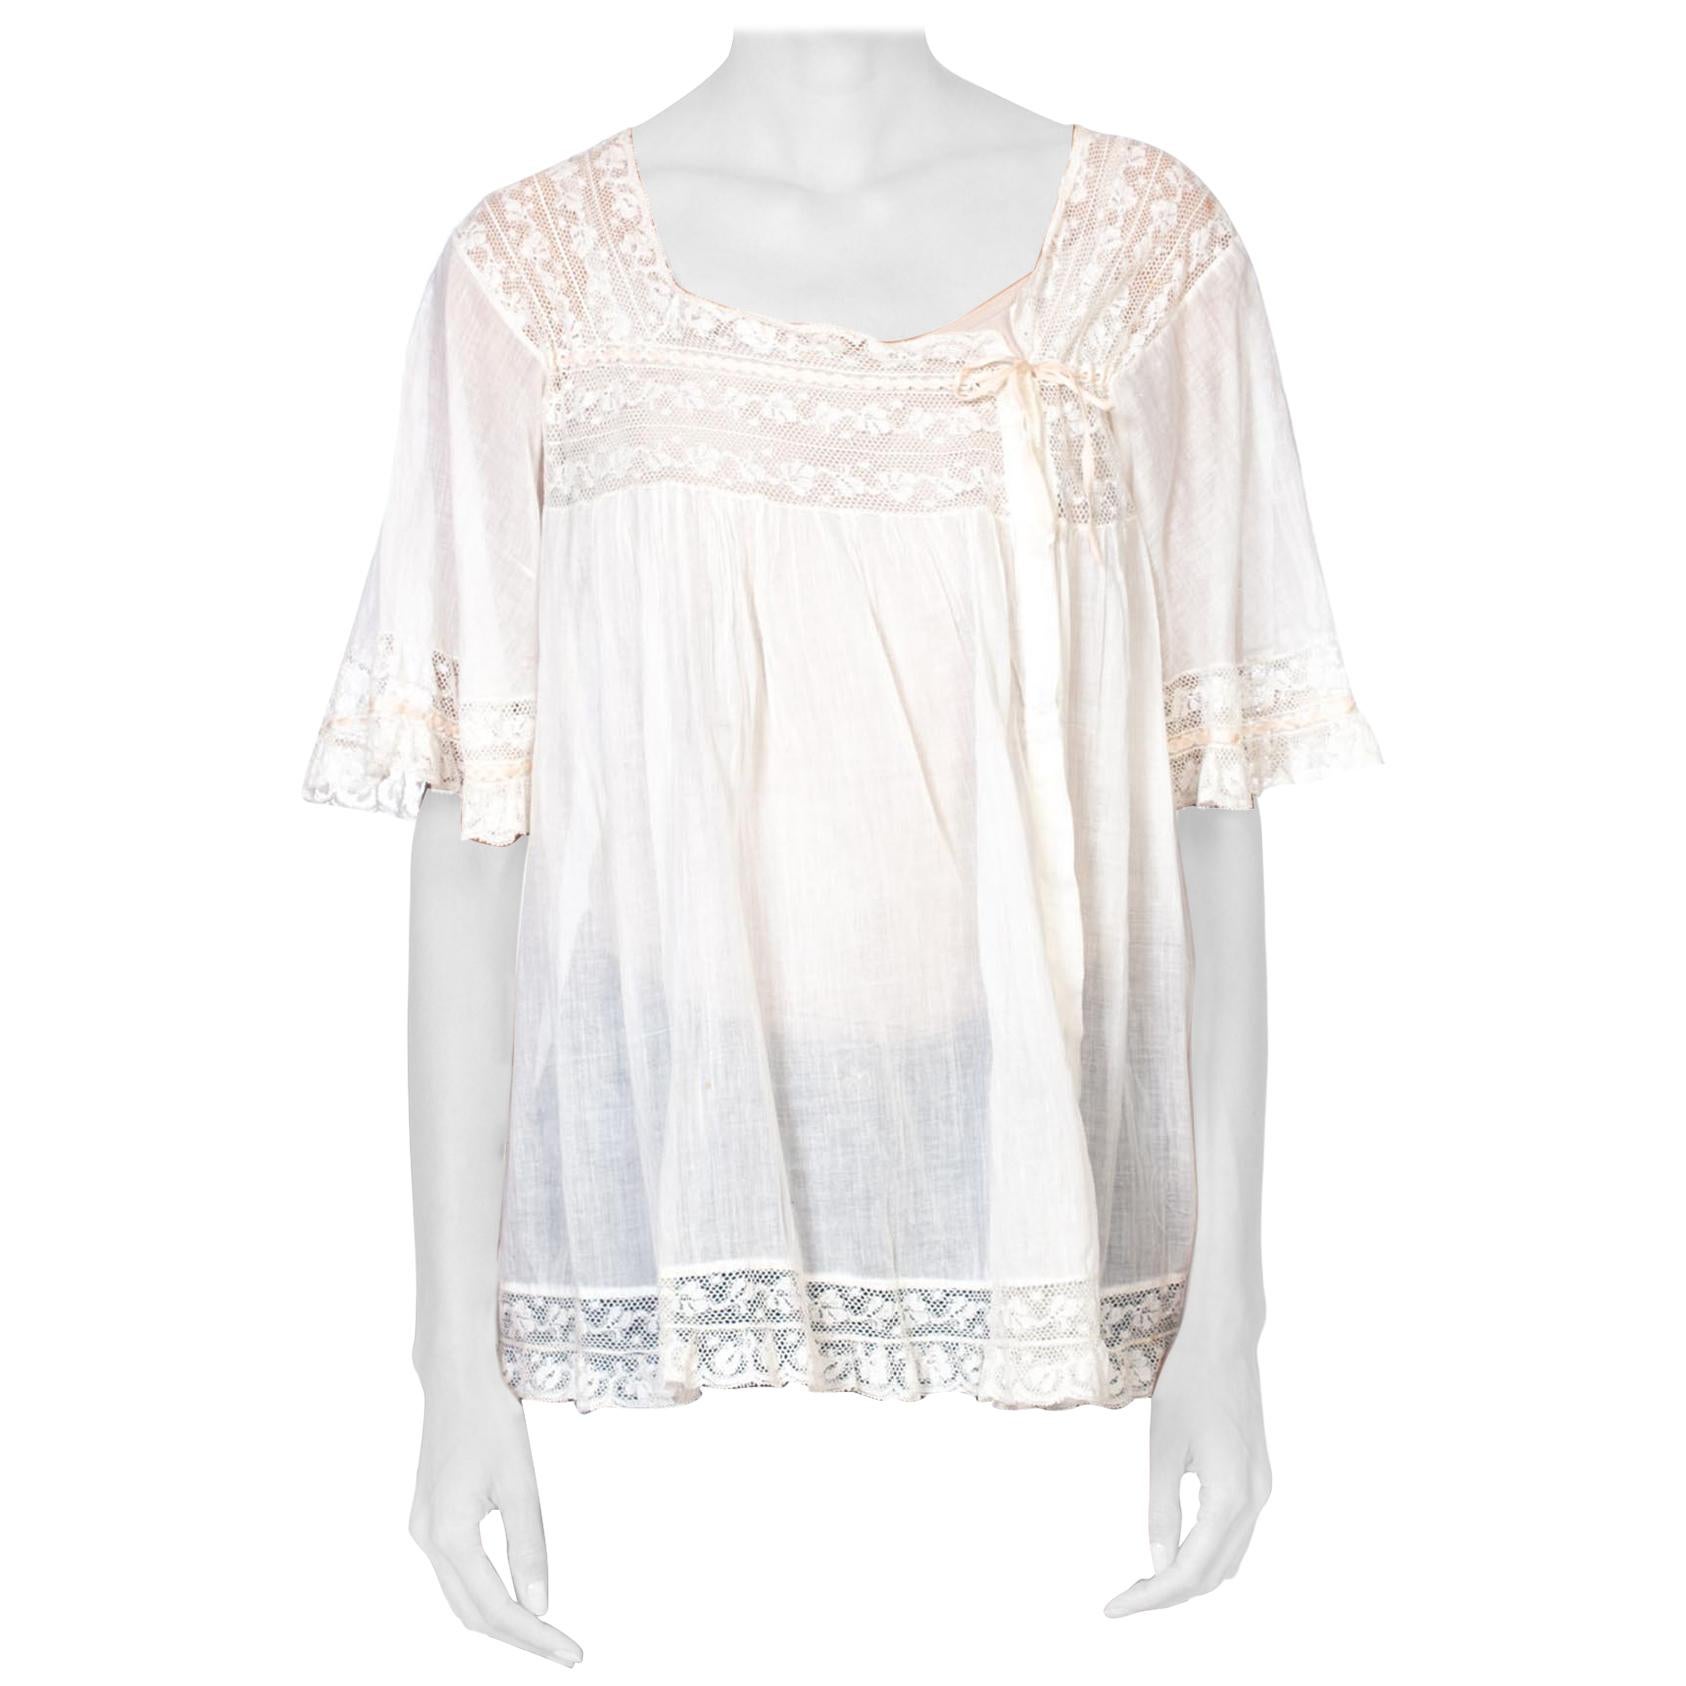 Victorian White Cotton Voile & Lace Oversized Boho Bed Jacket Top